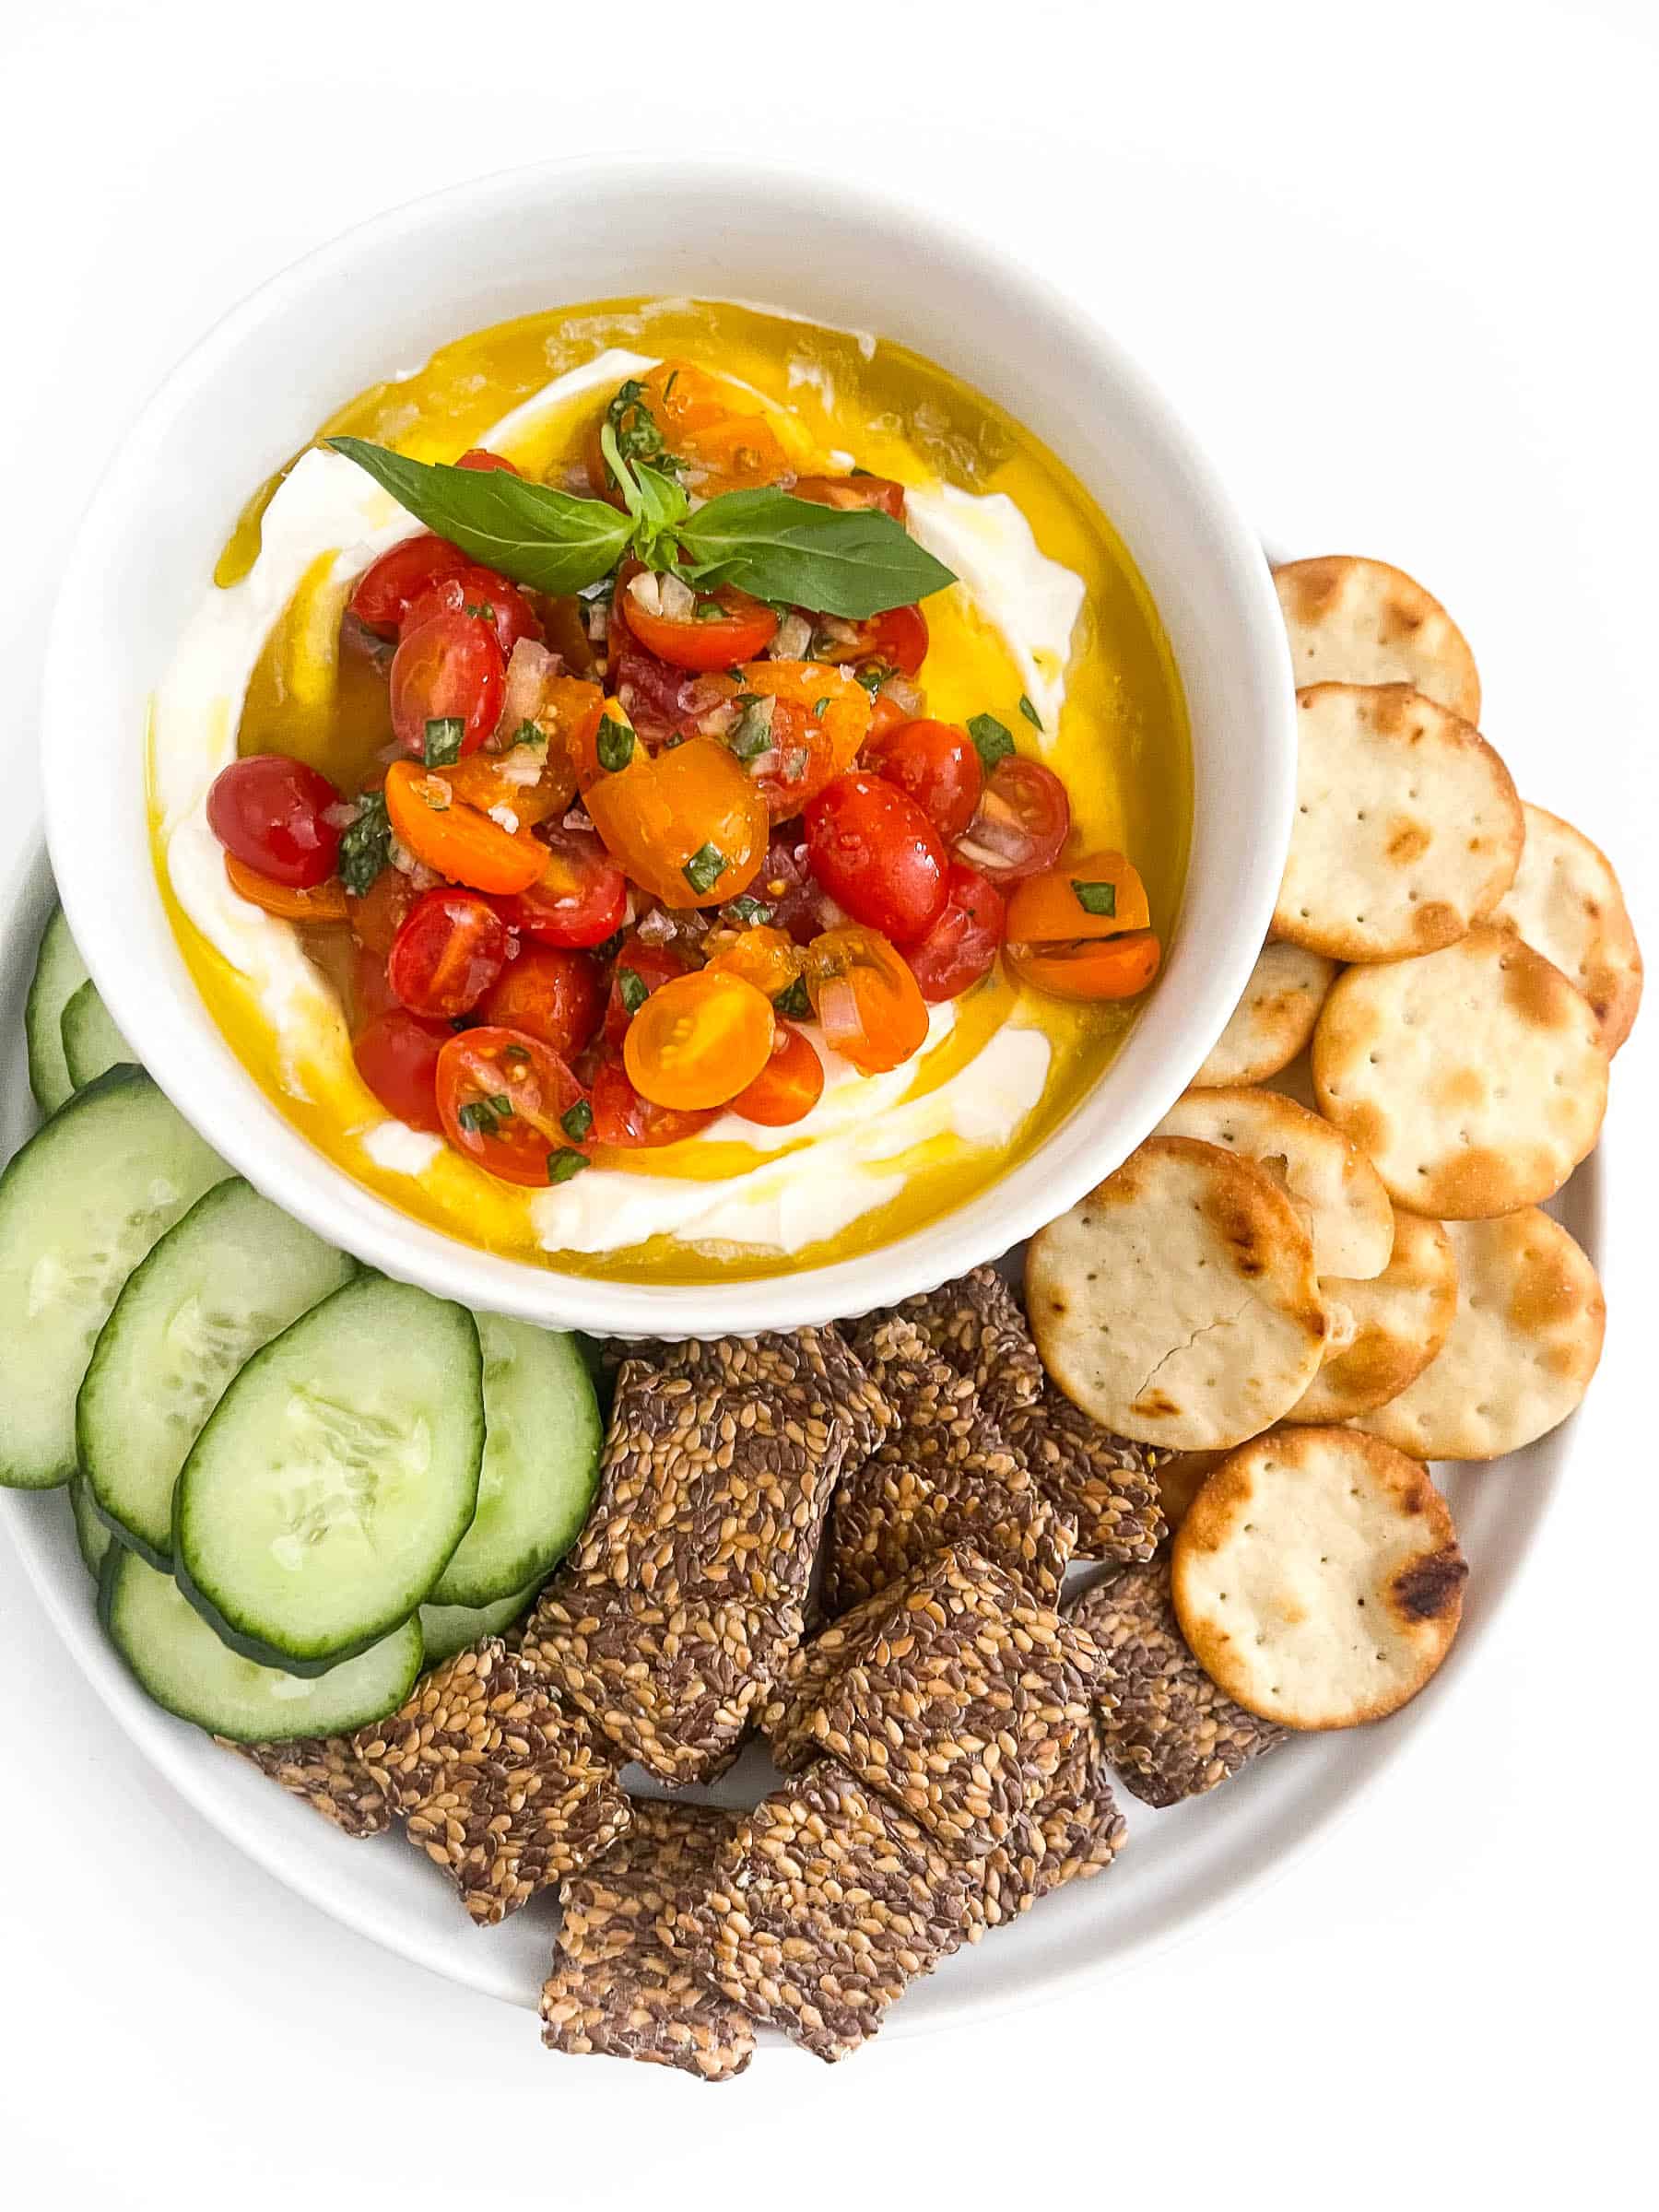 Whipped ricotta dip in a white bowl topped with grape tomatoes, basil and olive oil with cucumbers and crackers